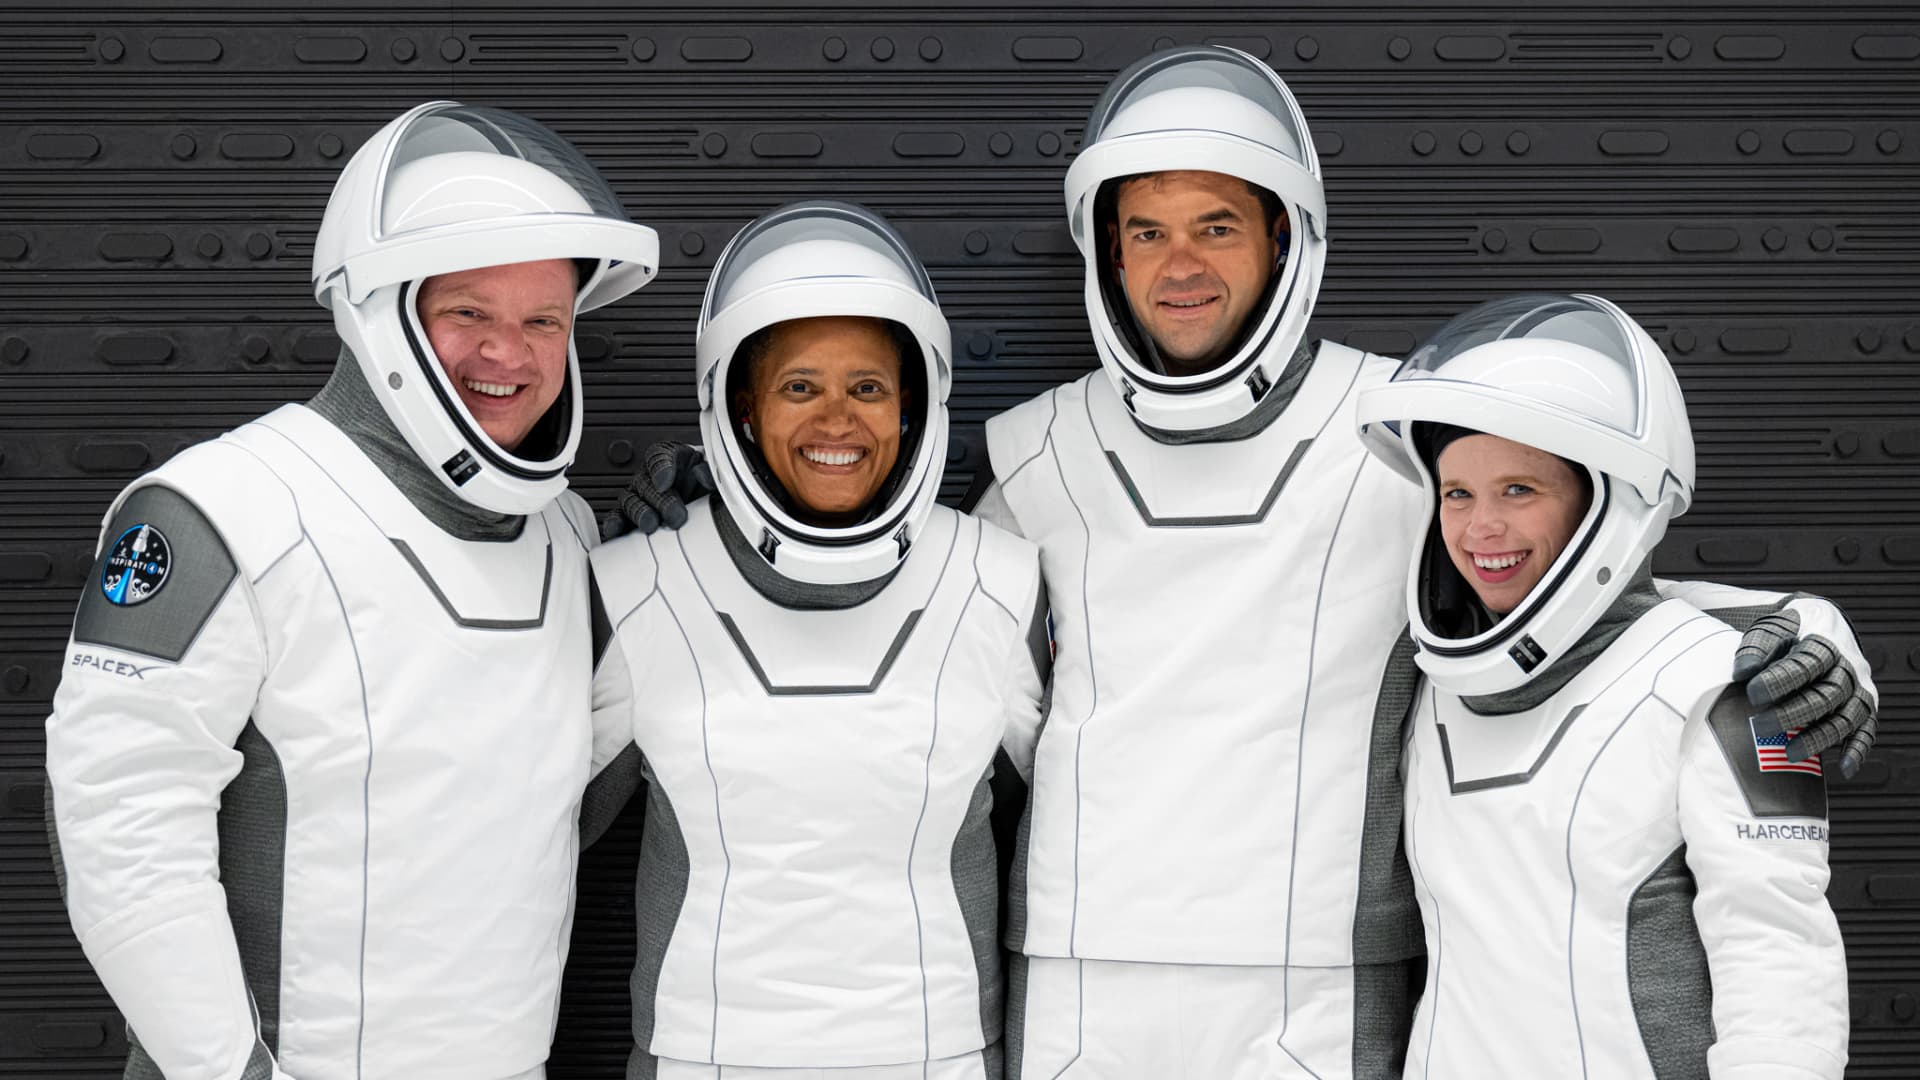 The Inspiration4 crew in their SpaceX spacesuits, from left: Chris Sembroski, Dr. Sian Proctor, Jared Isaacman, and Hayley Arceneaux